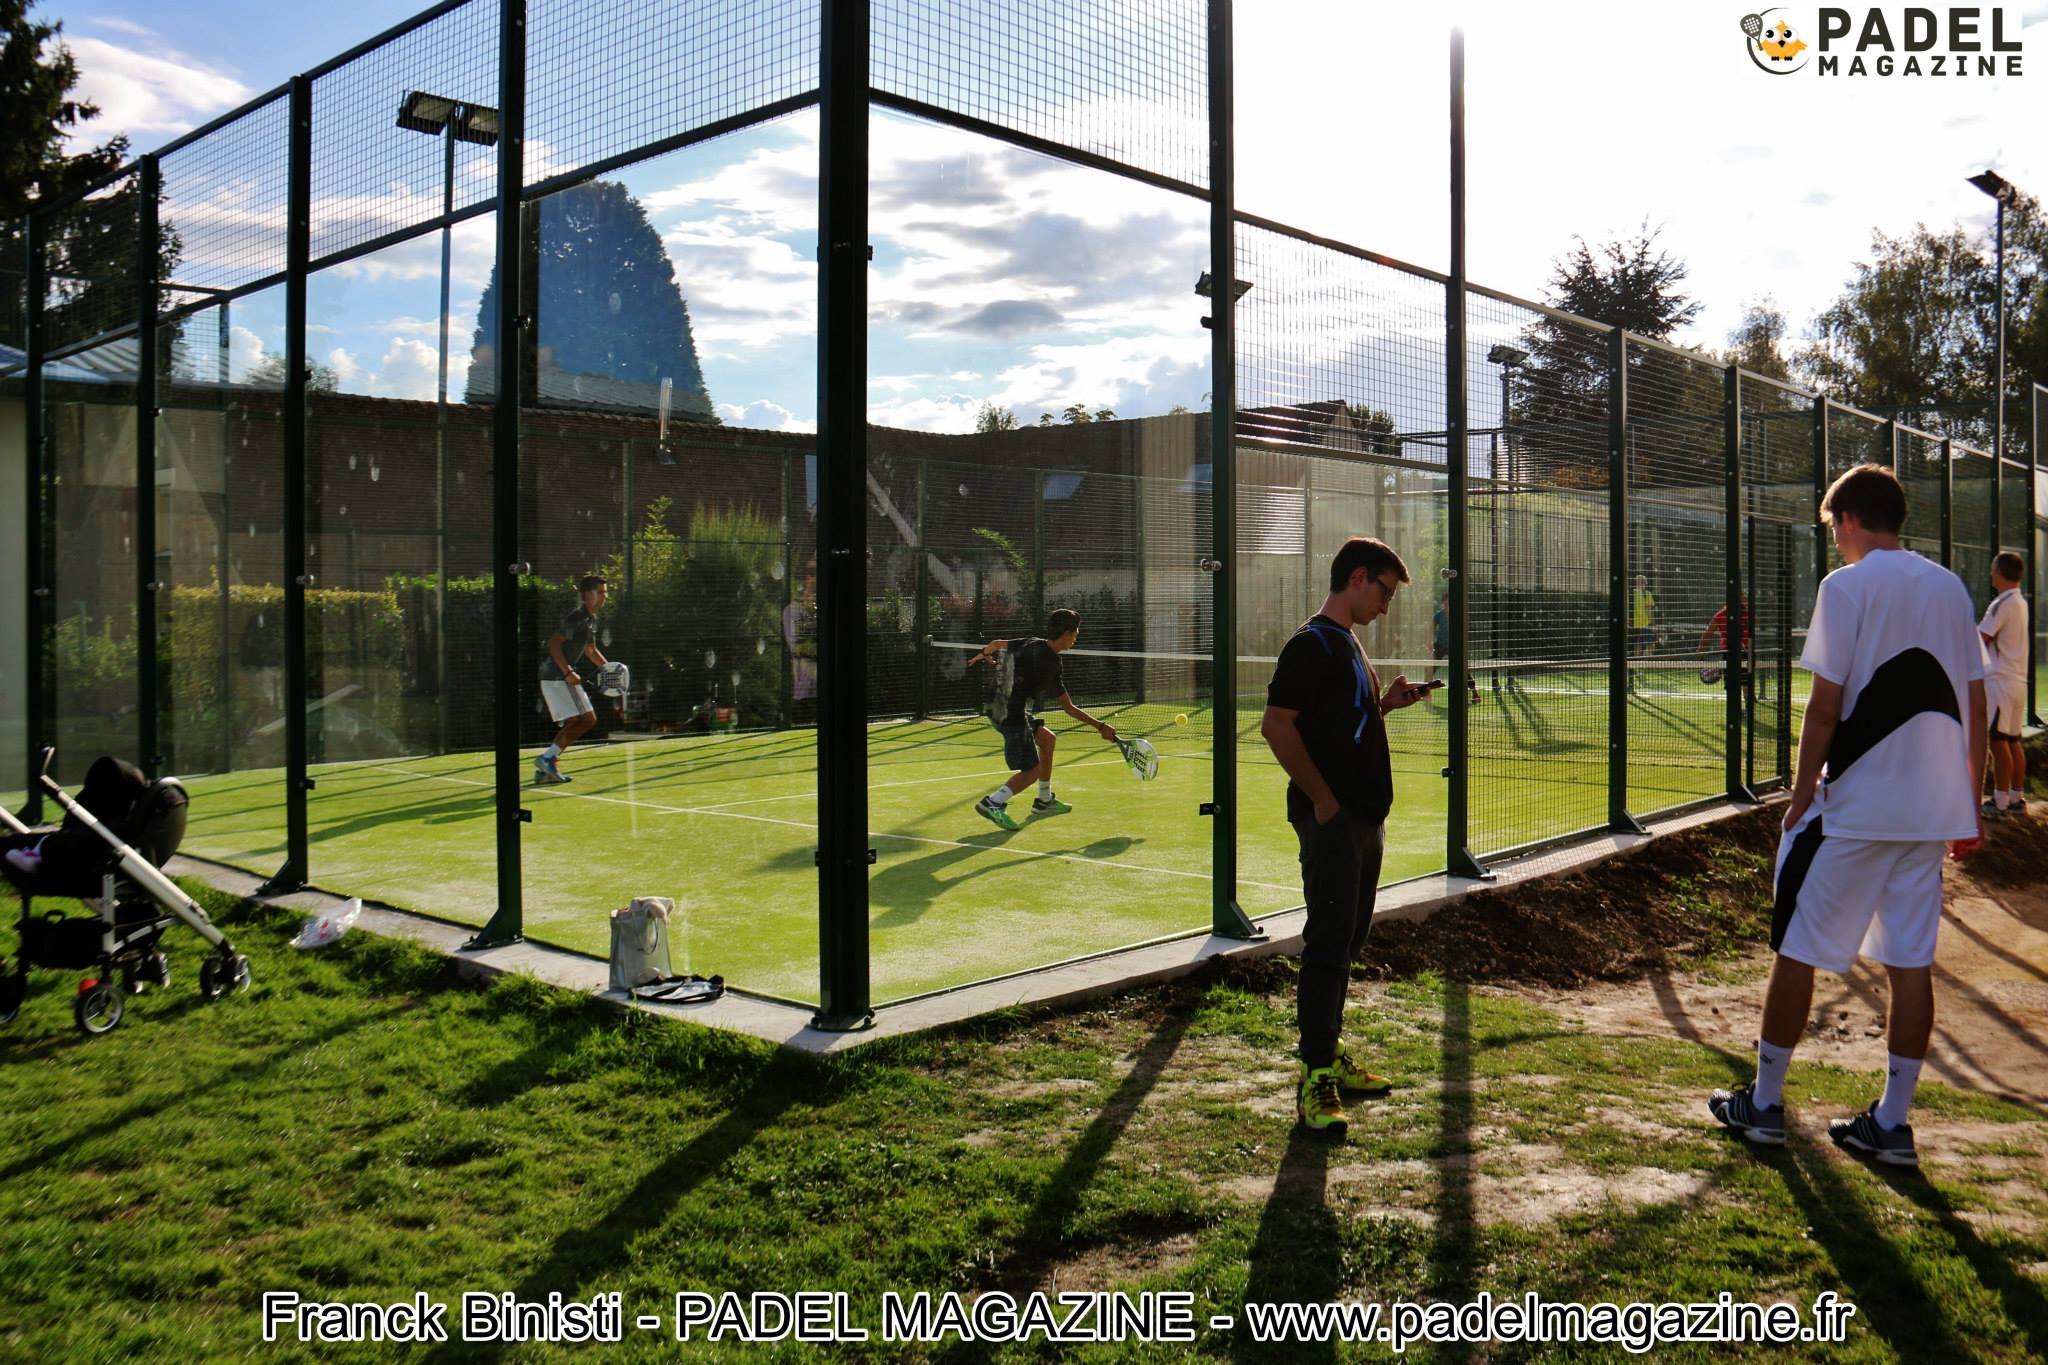 The Club des Ulis is embarking on padel